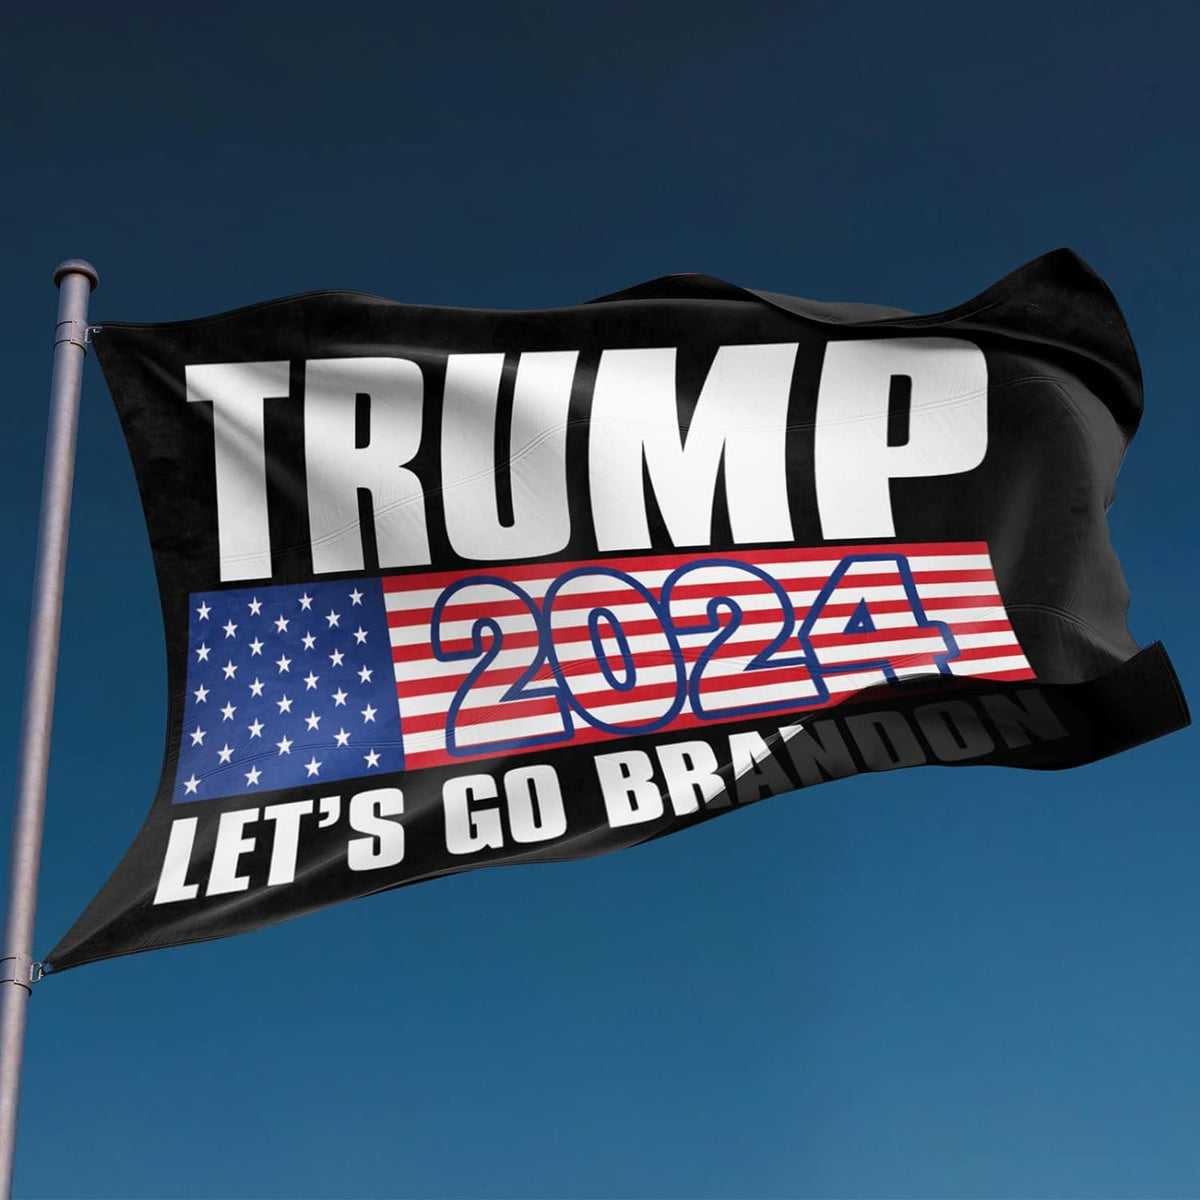 Trump 2024 Flag with Lets Go Branson 3x5 Feet Double Stitched Trump Flag 2024 with 2 Brass Grommets for Room Wall Durable Vivid Color Indoor Outdoor Garden Flags & Banners Sign (A Style Trump